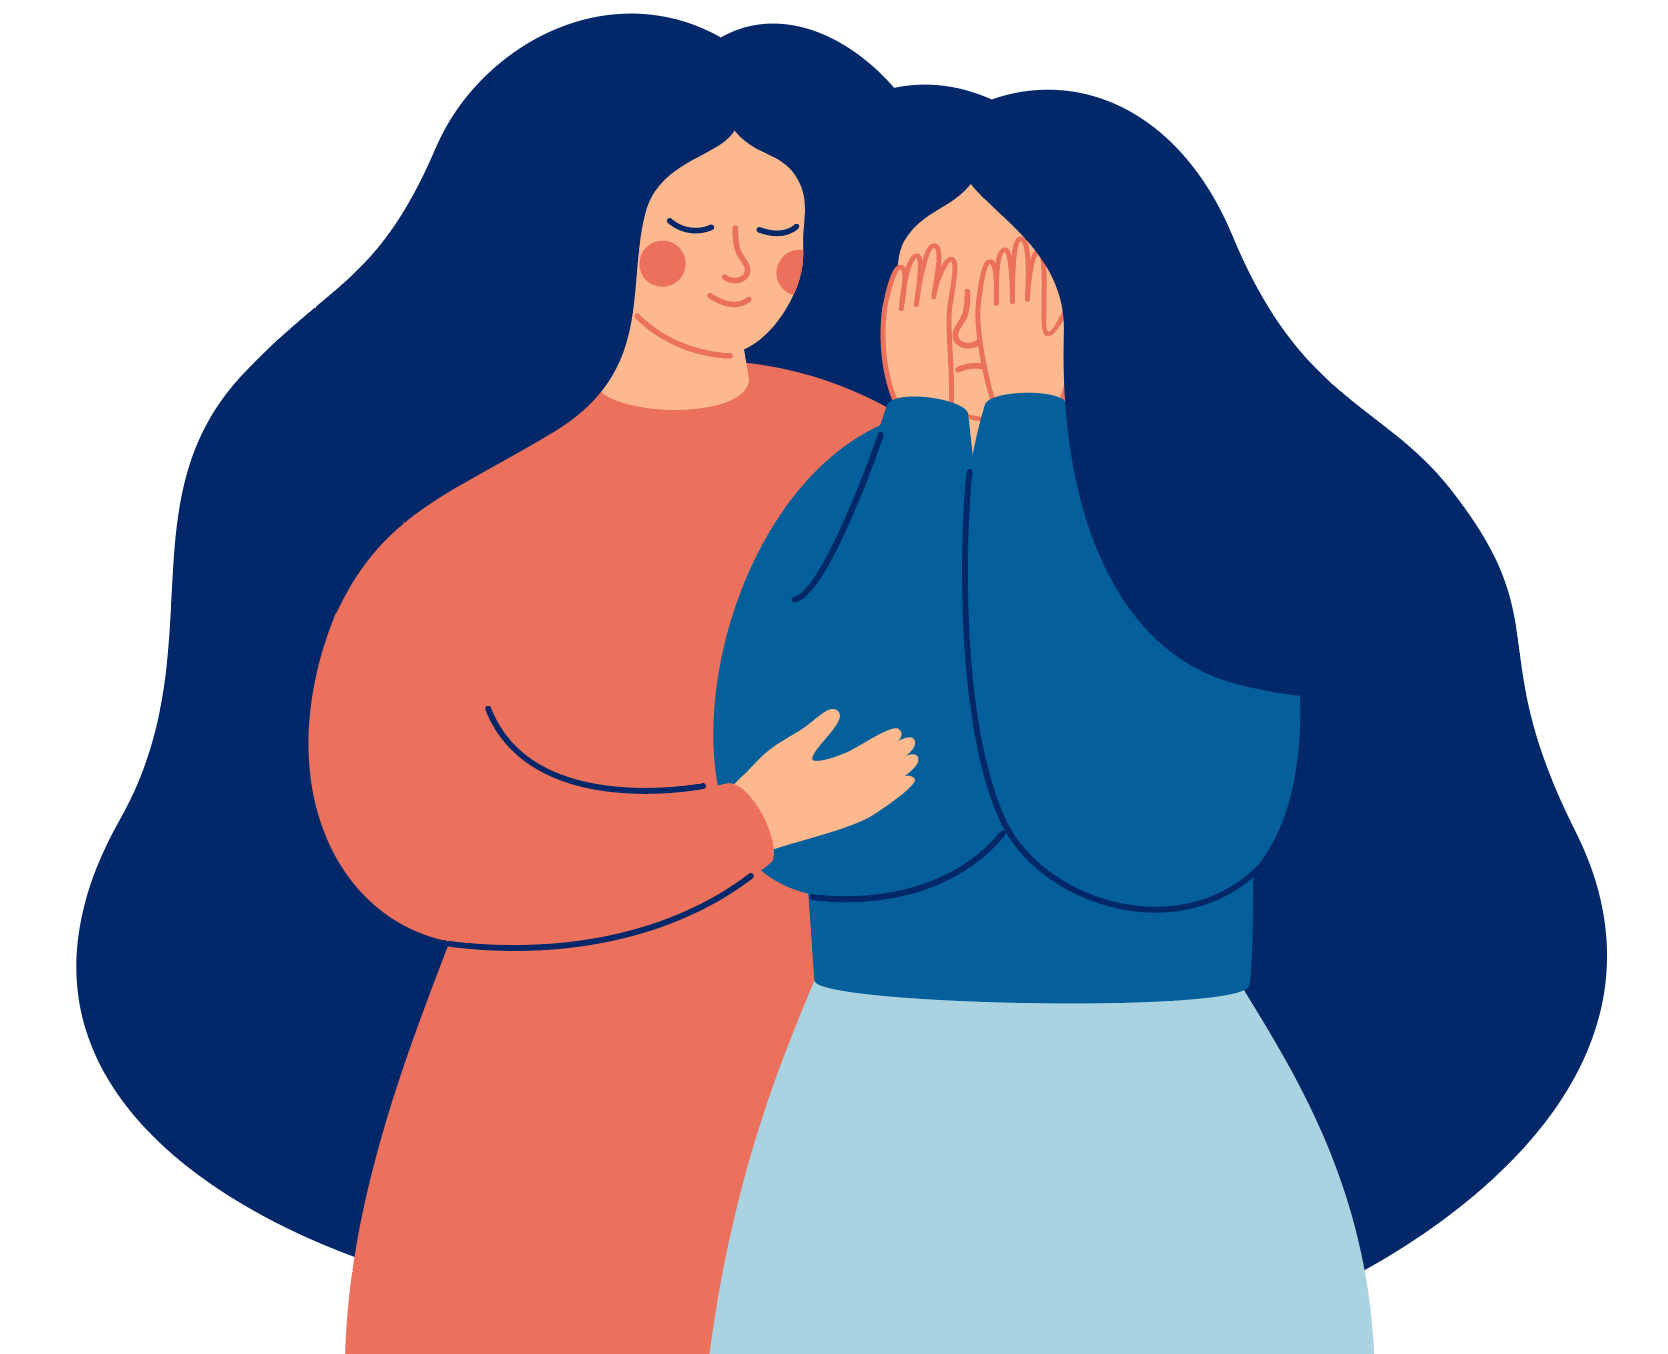 A woman holding another woman in a helping embrace.